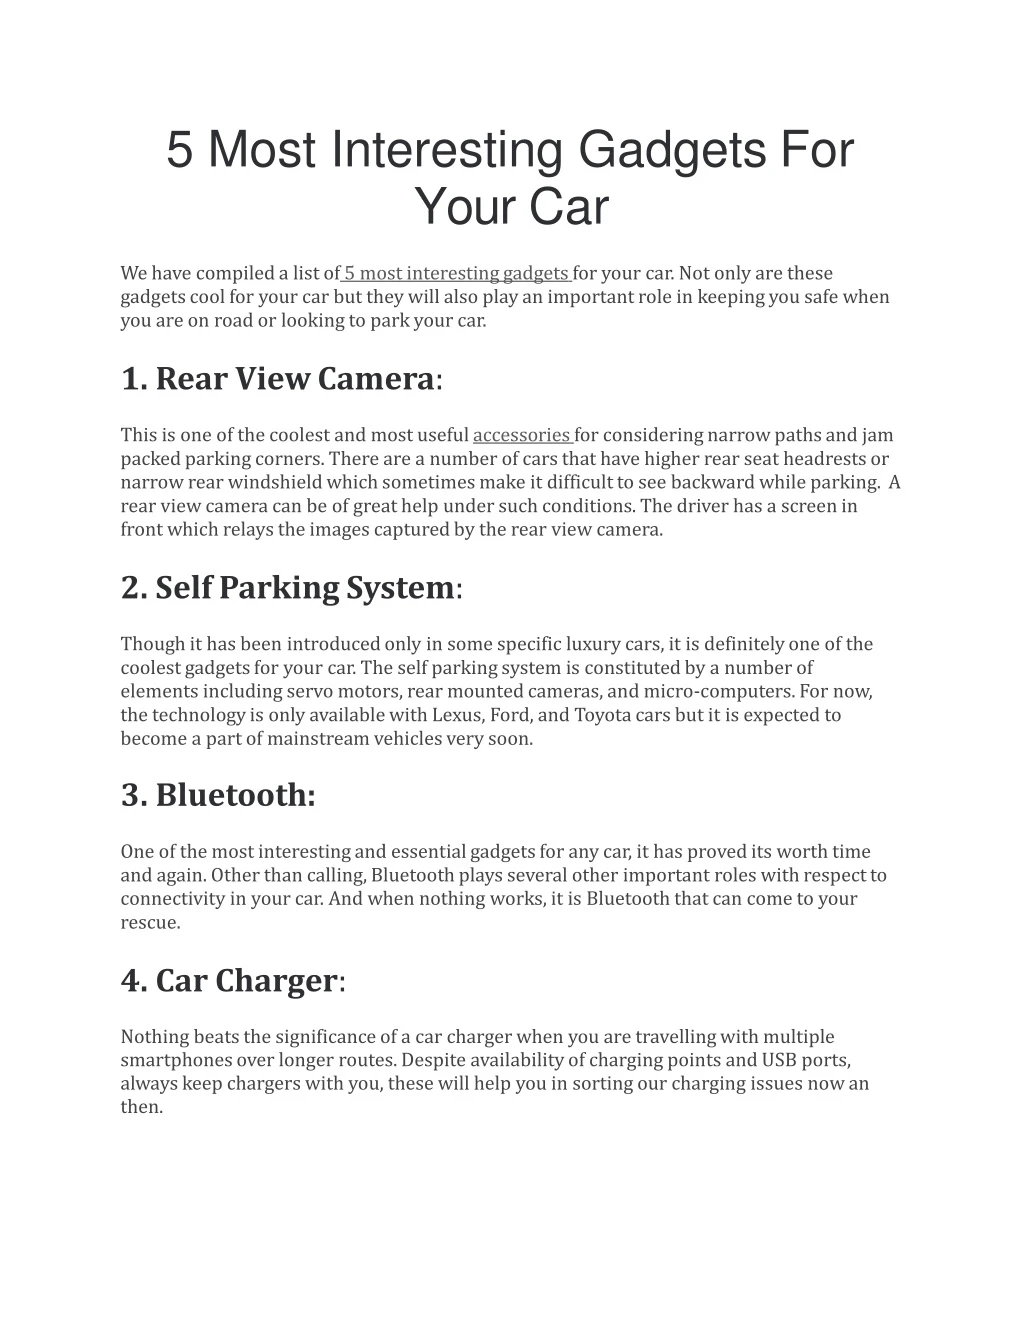 5 most interesting gadgets for your car